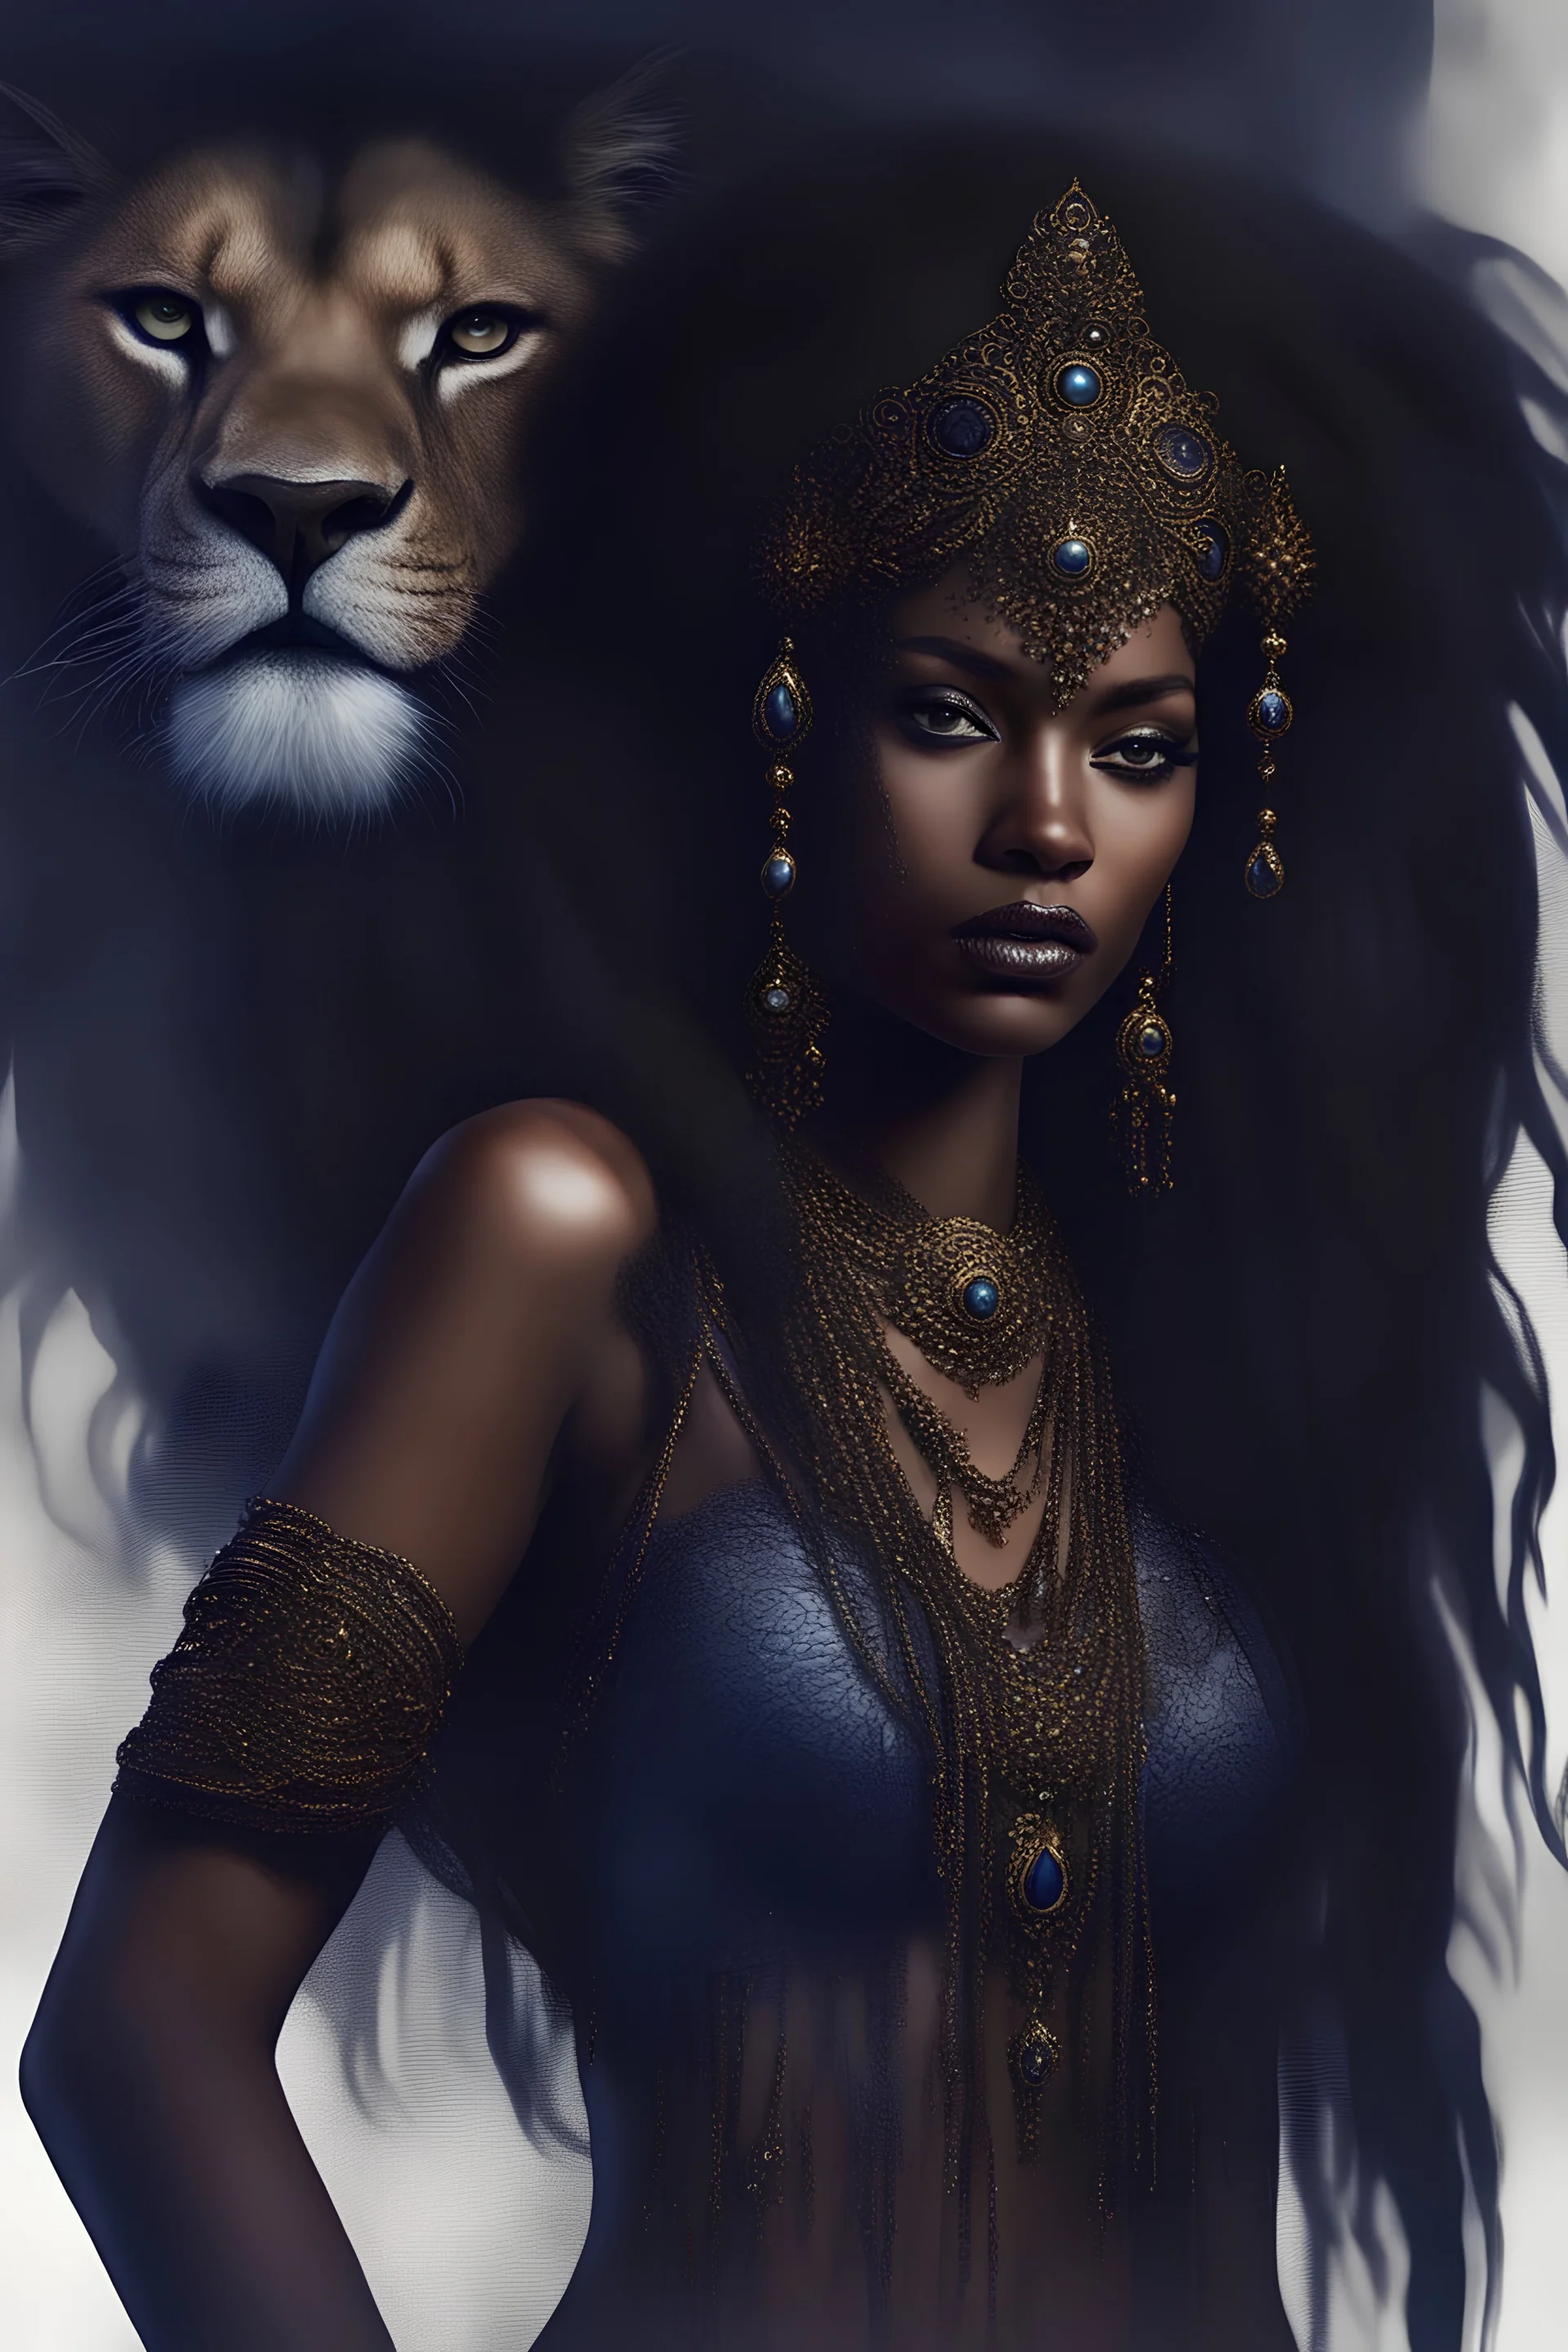 hot worrior woman of water , with mixing a lion style accessories and fashion and hair style, belly,ornaments hair,sparkle ,candels,realistic,portrait,a hauntingly beautiful masterpiece emerges from the depths of darkness: an ethereal, noir-inspired portrait of a figure brown skin shrouded in misty shades of midnight blue and smoky charcoal, exuding a sense of mysterious allure and captivating the viewer with its enigmatic gaze